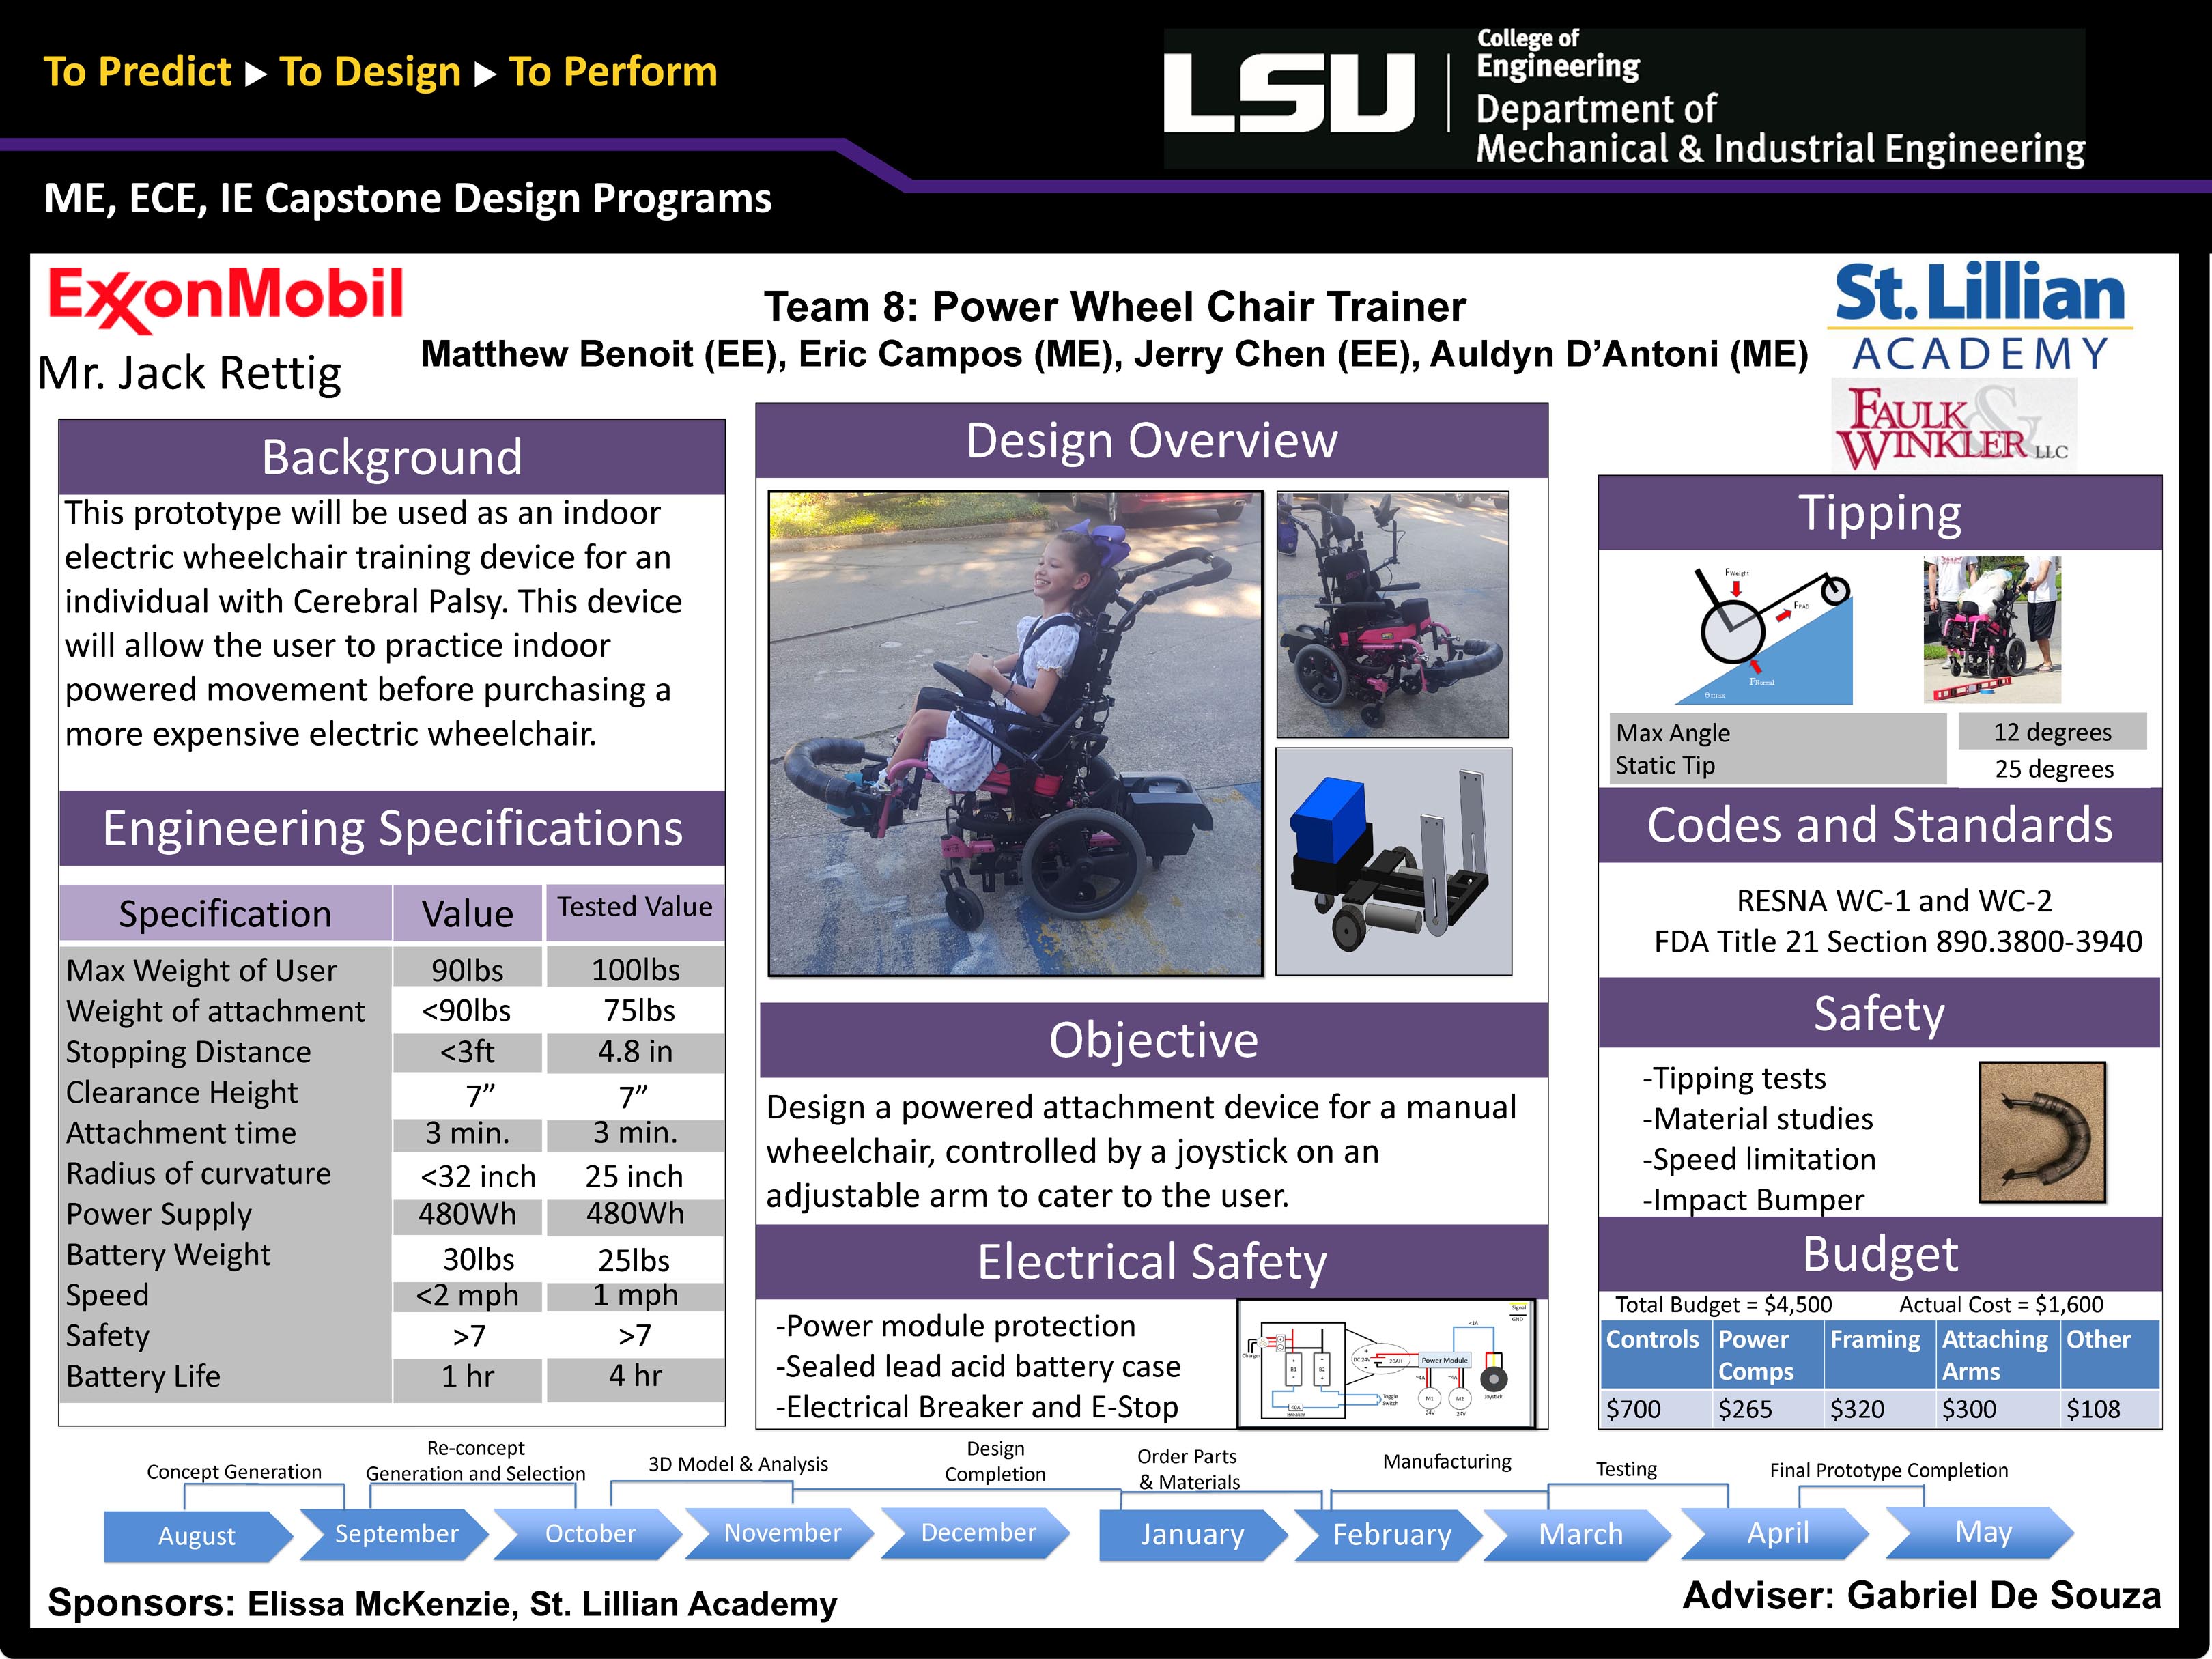 Project 8: Power Wheel Chair Trainer